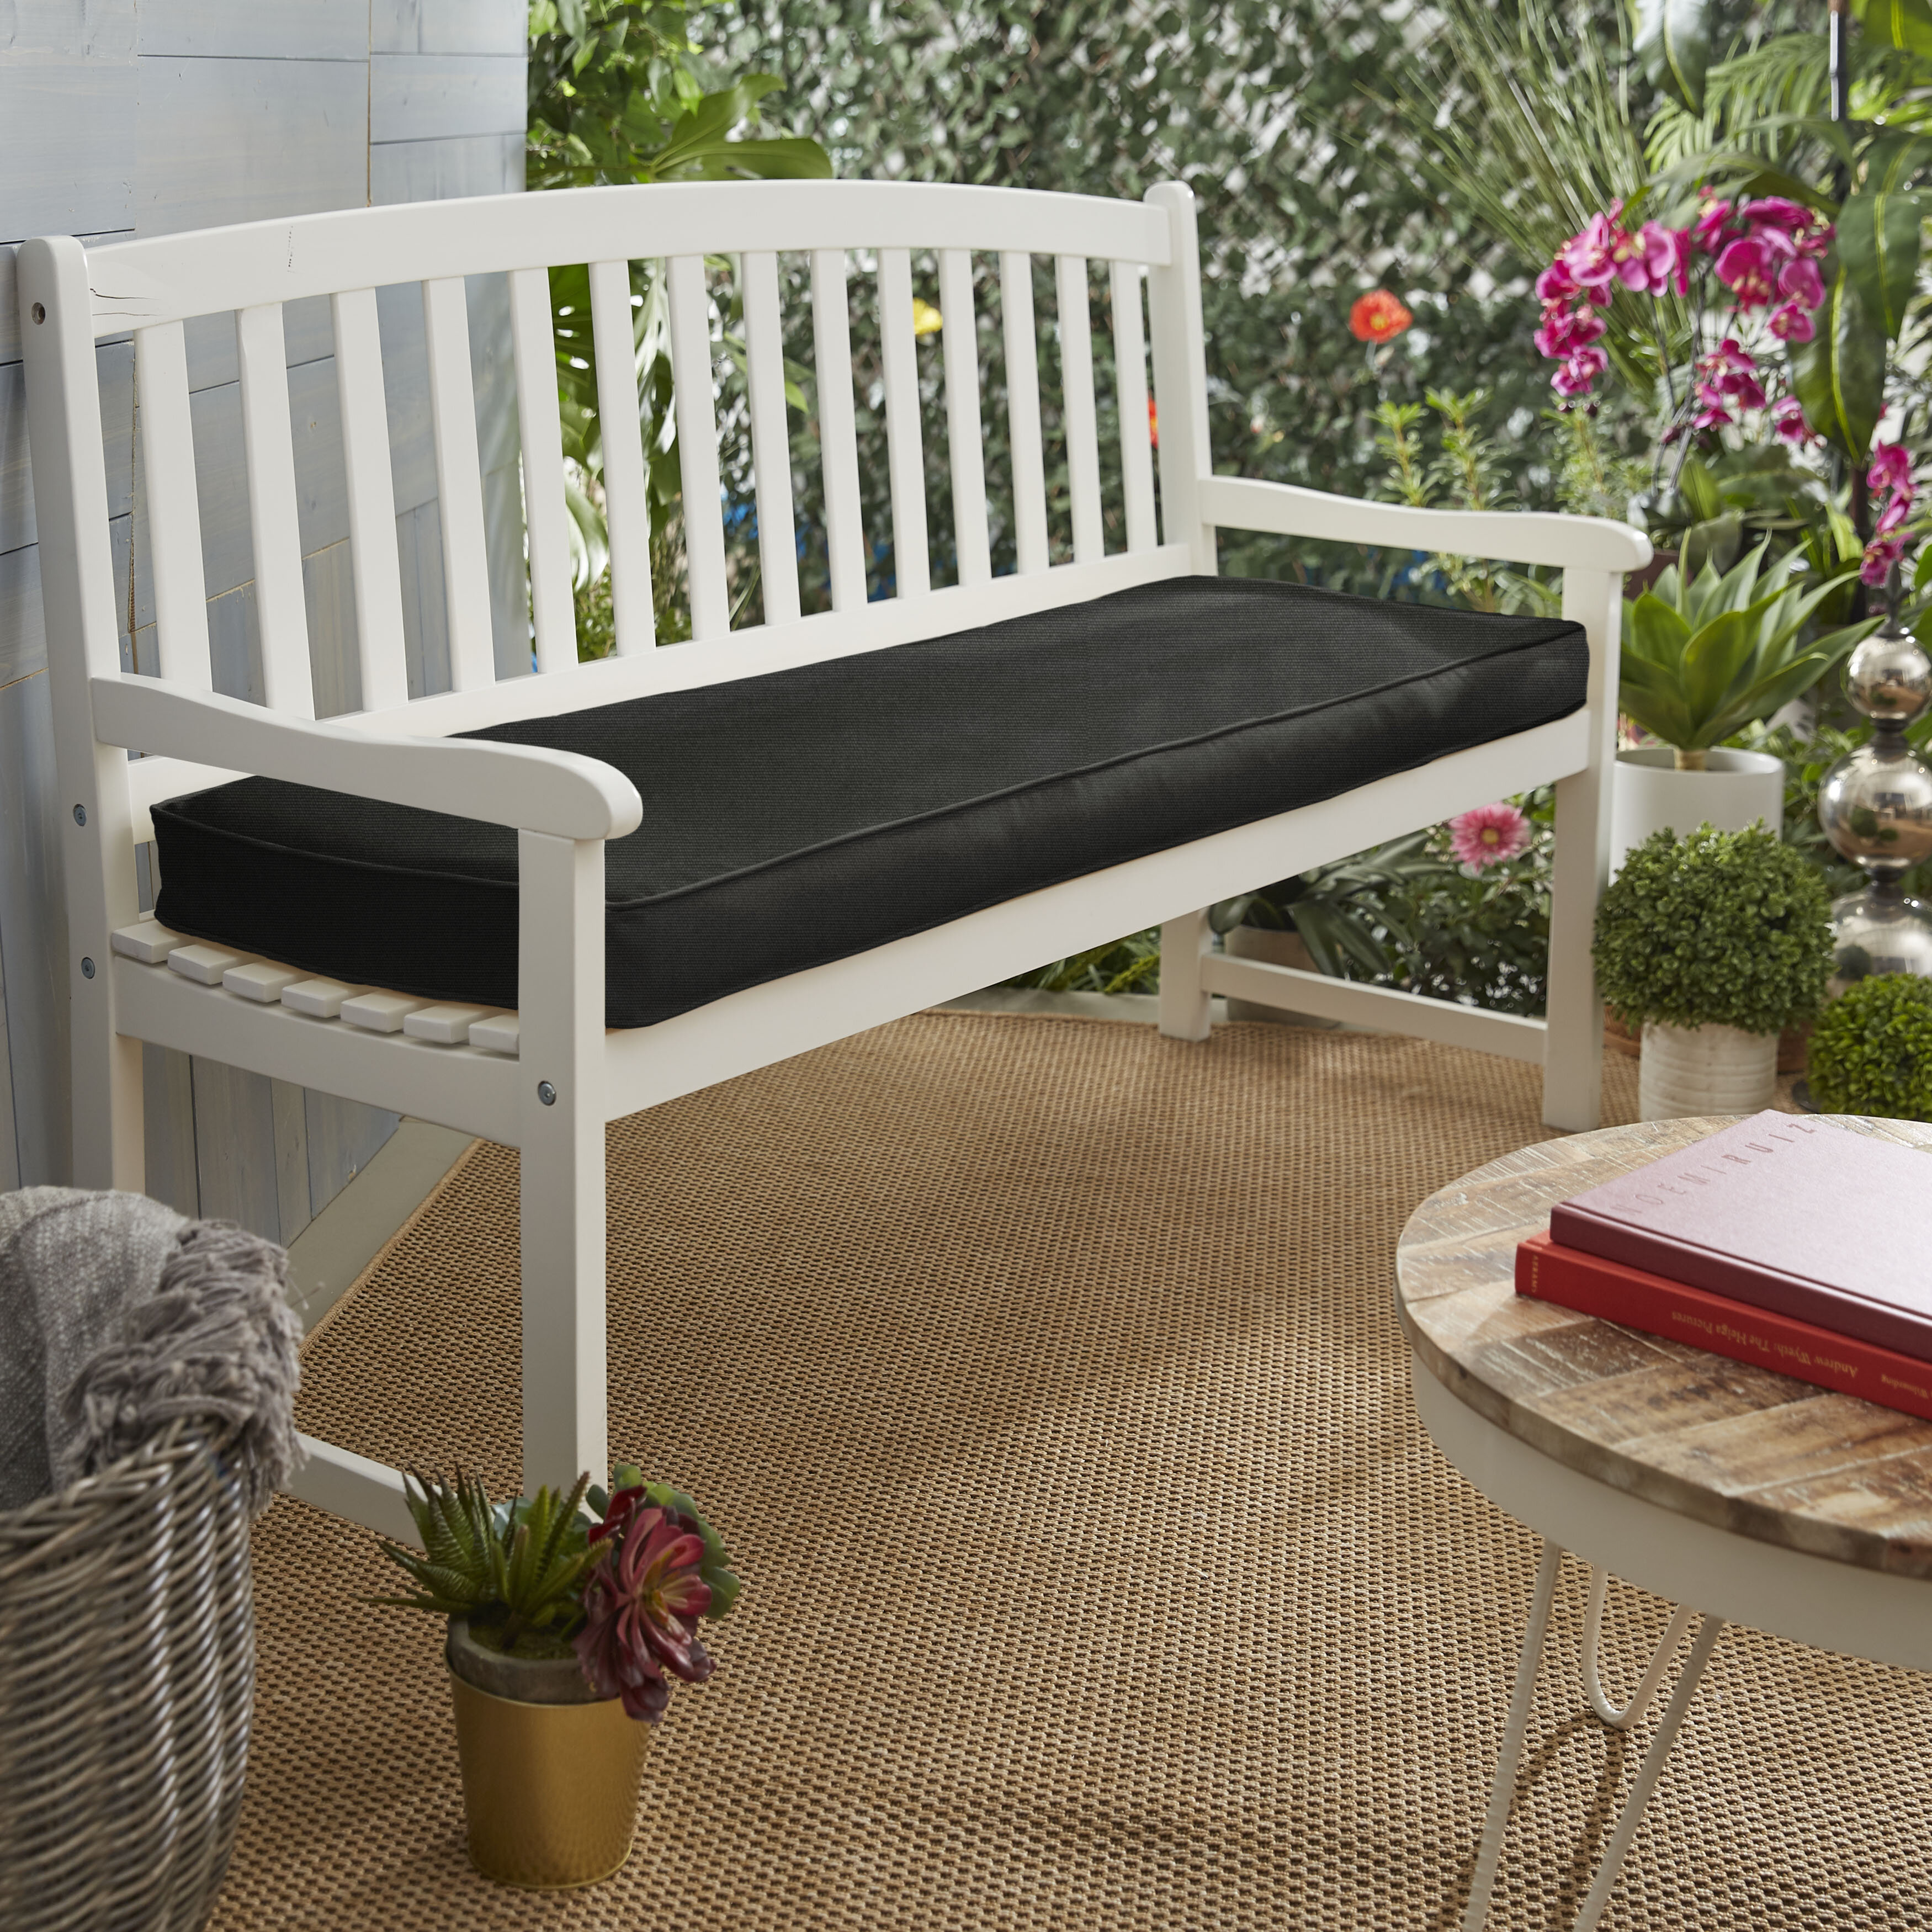 Bench Black Patio Furniture Cushions You'll Love in 2020